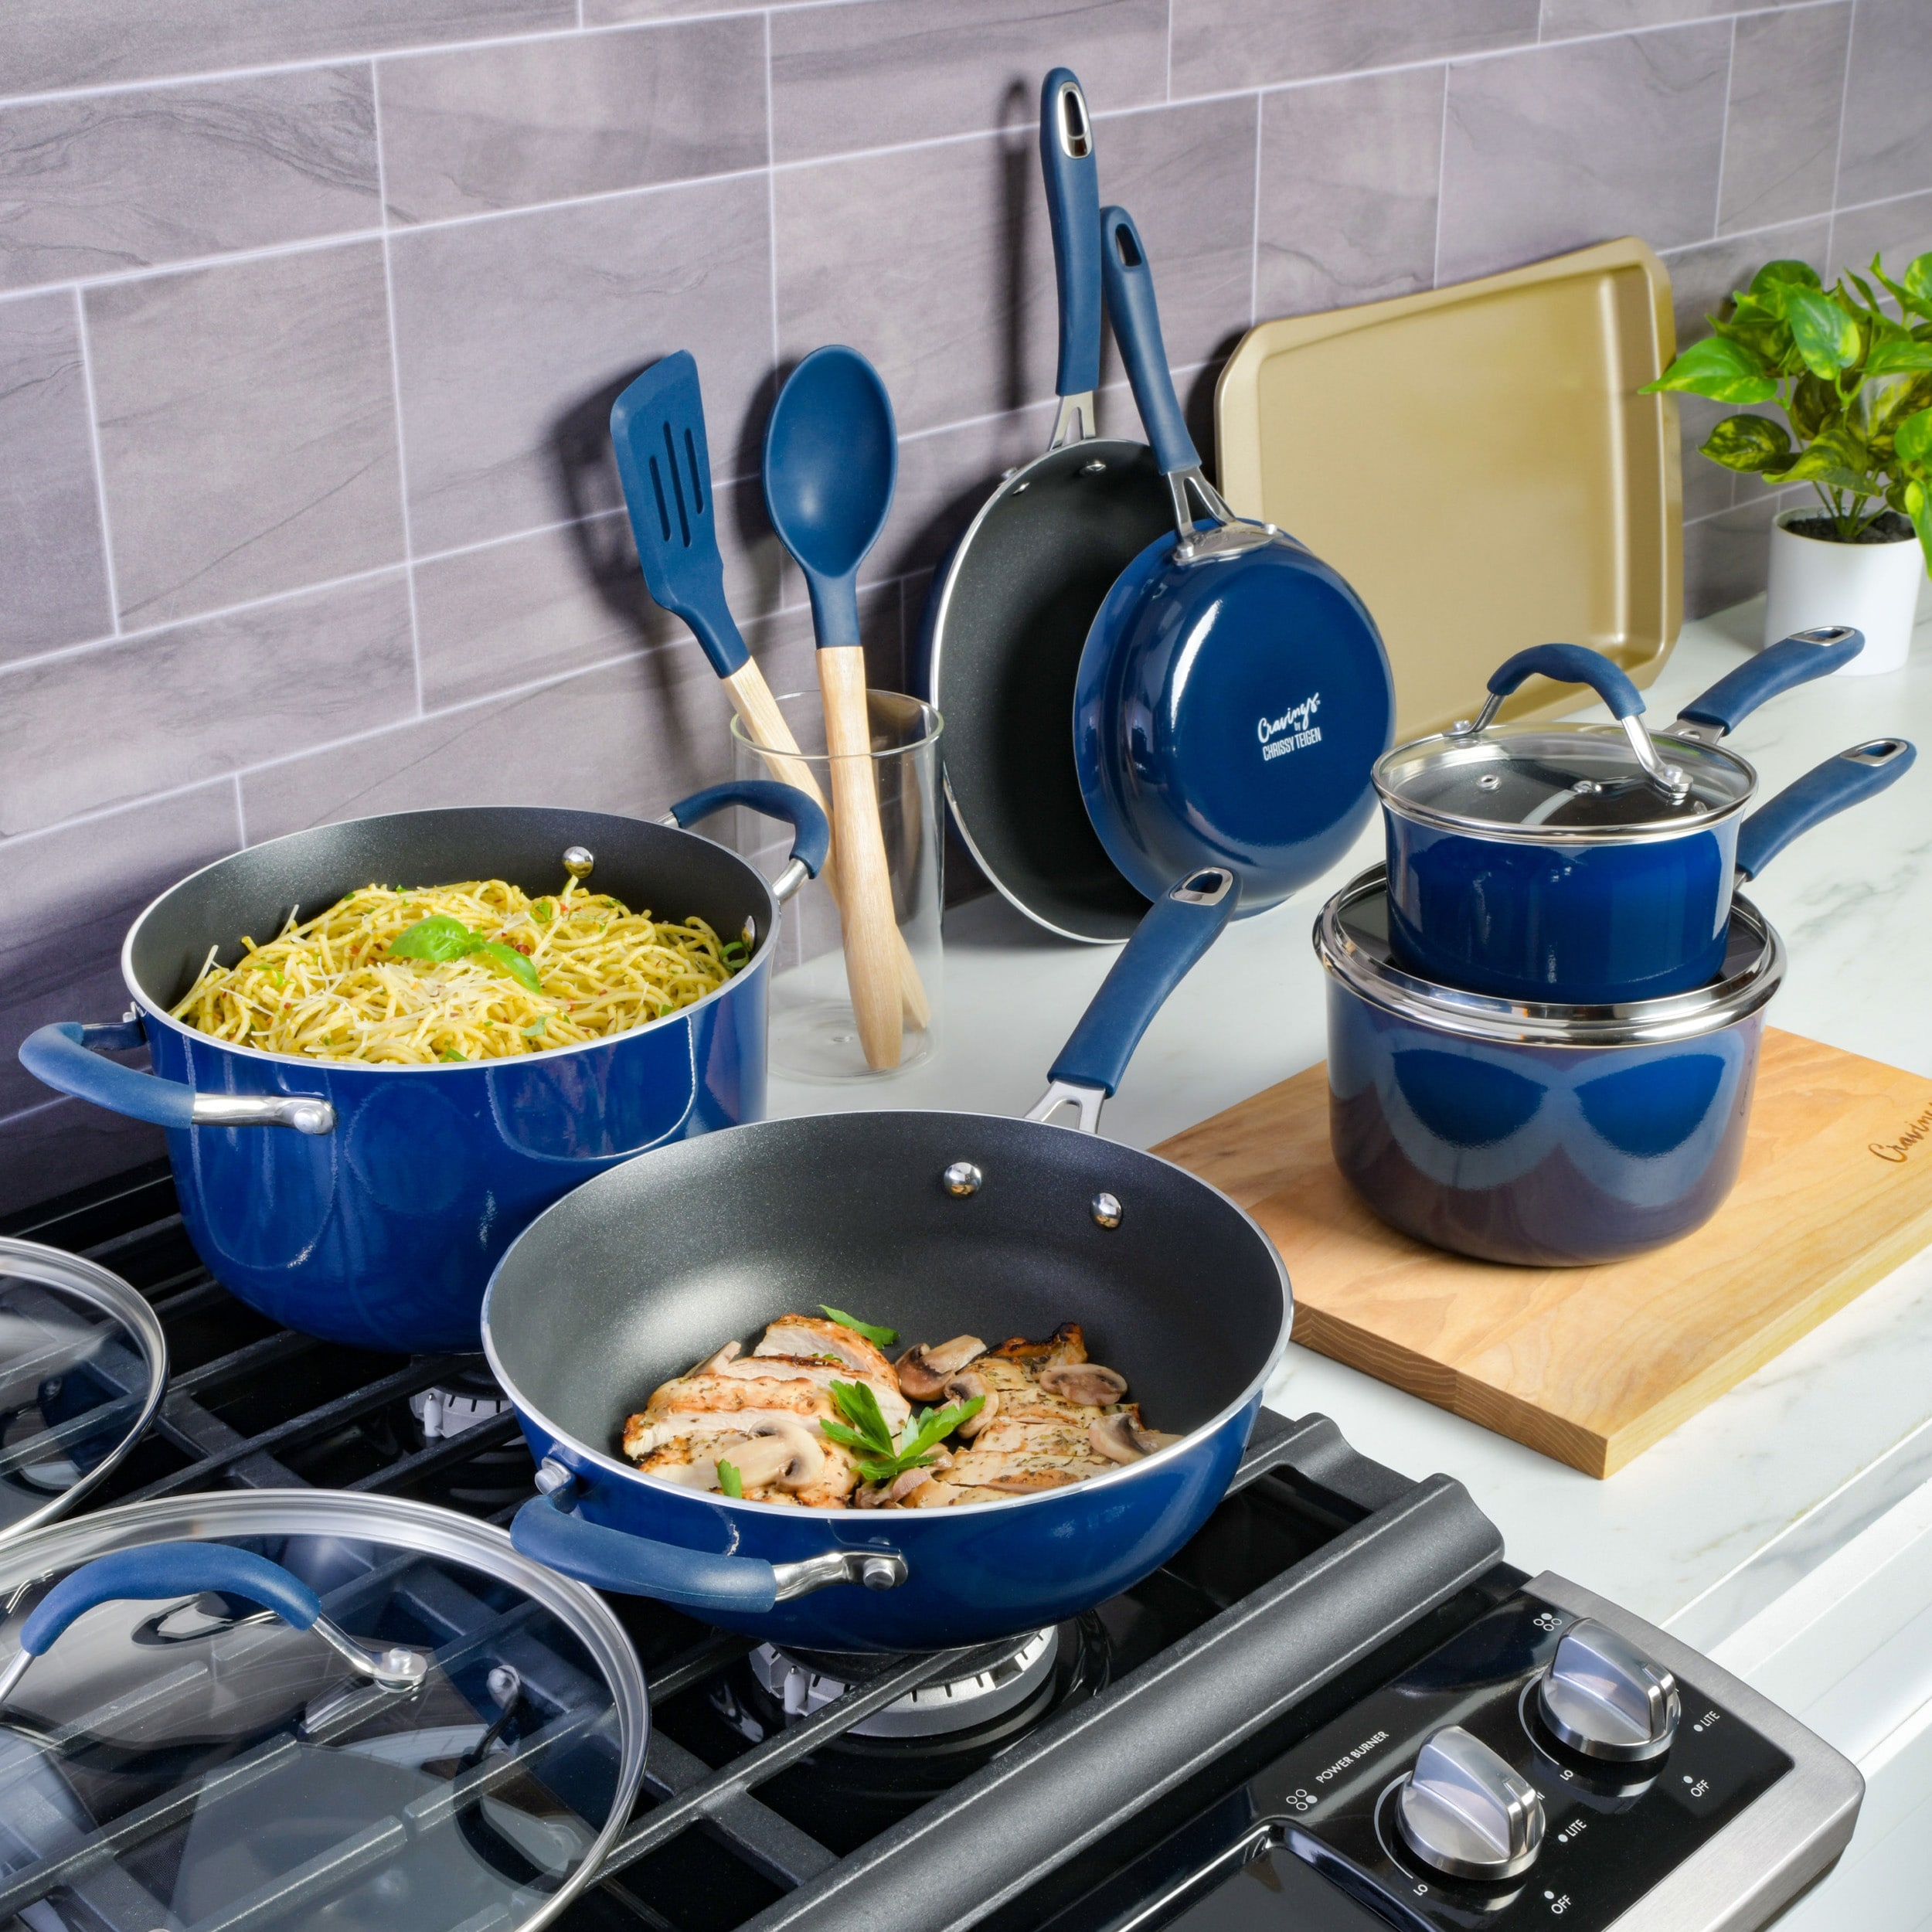 https://ak1.ostkcdn.com/images/products/is/images/direct/6fc2aff41790bde8f18b099649151a16a347f2eb/Cravings-by-Chrissy-Teigen-14Pc-Aluminum-Cookware-Combo-Set-in-Blue.jpg